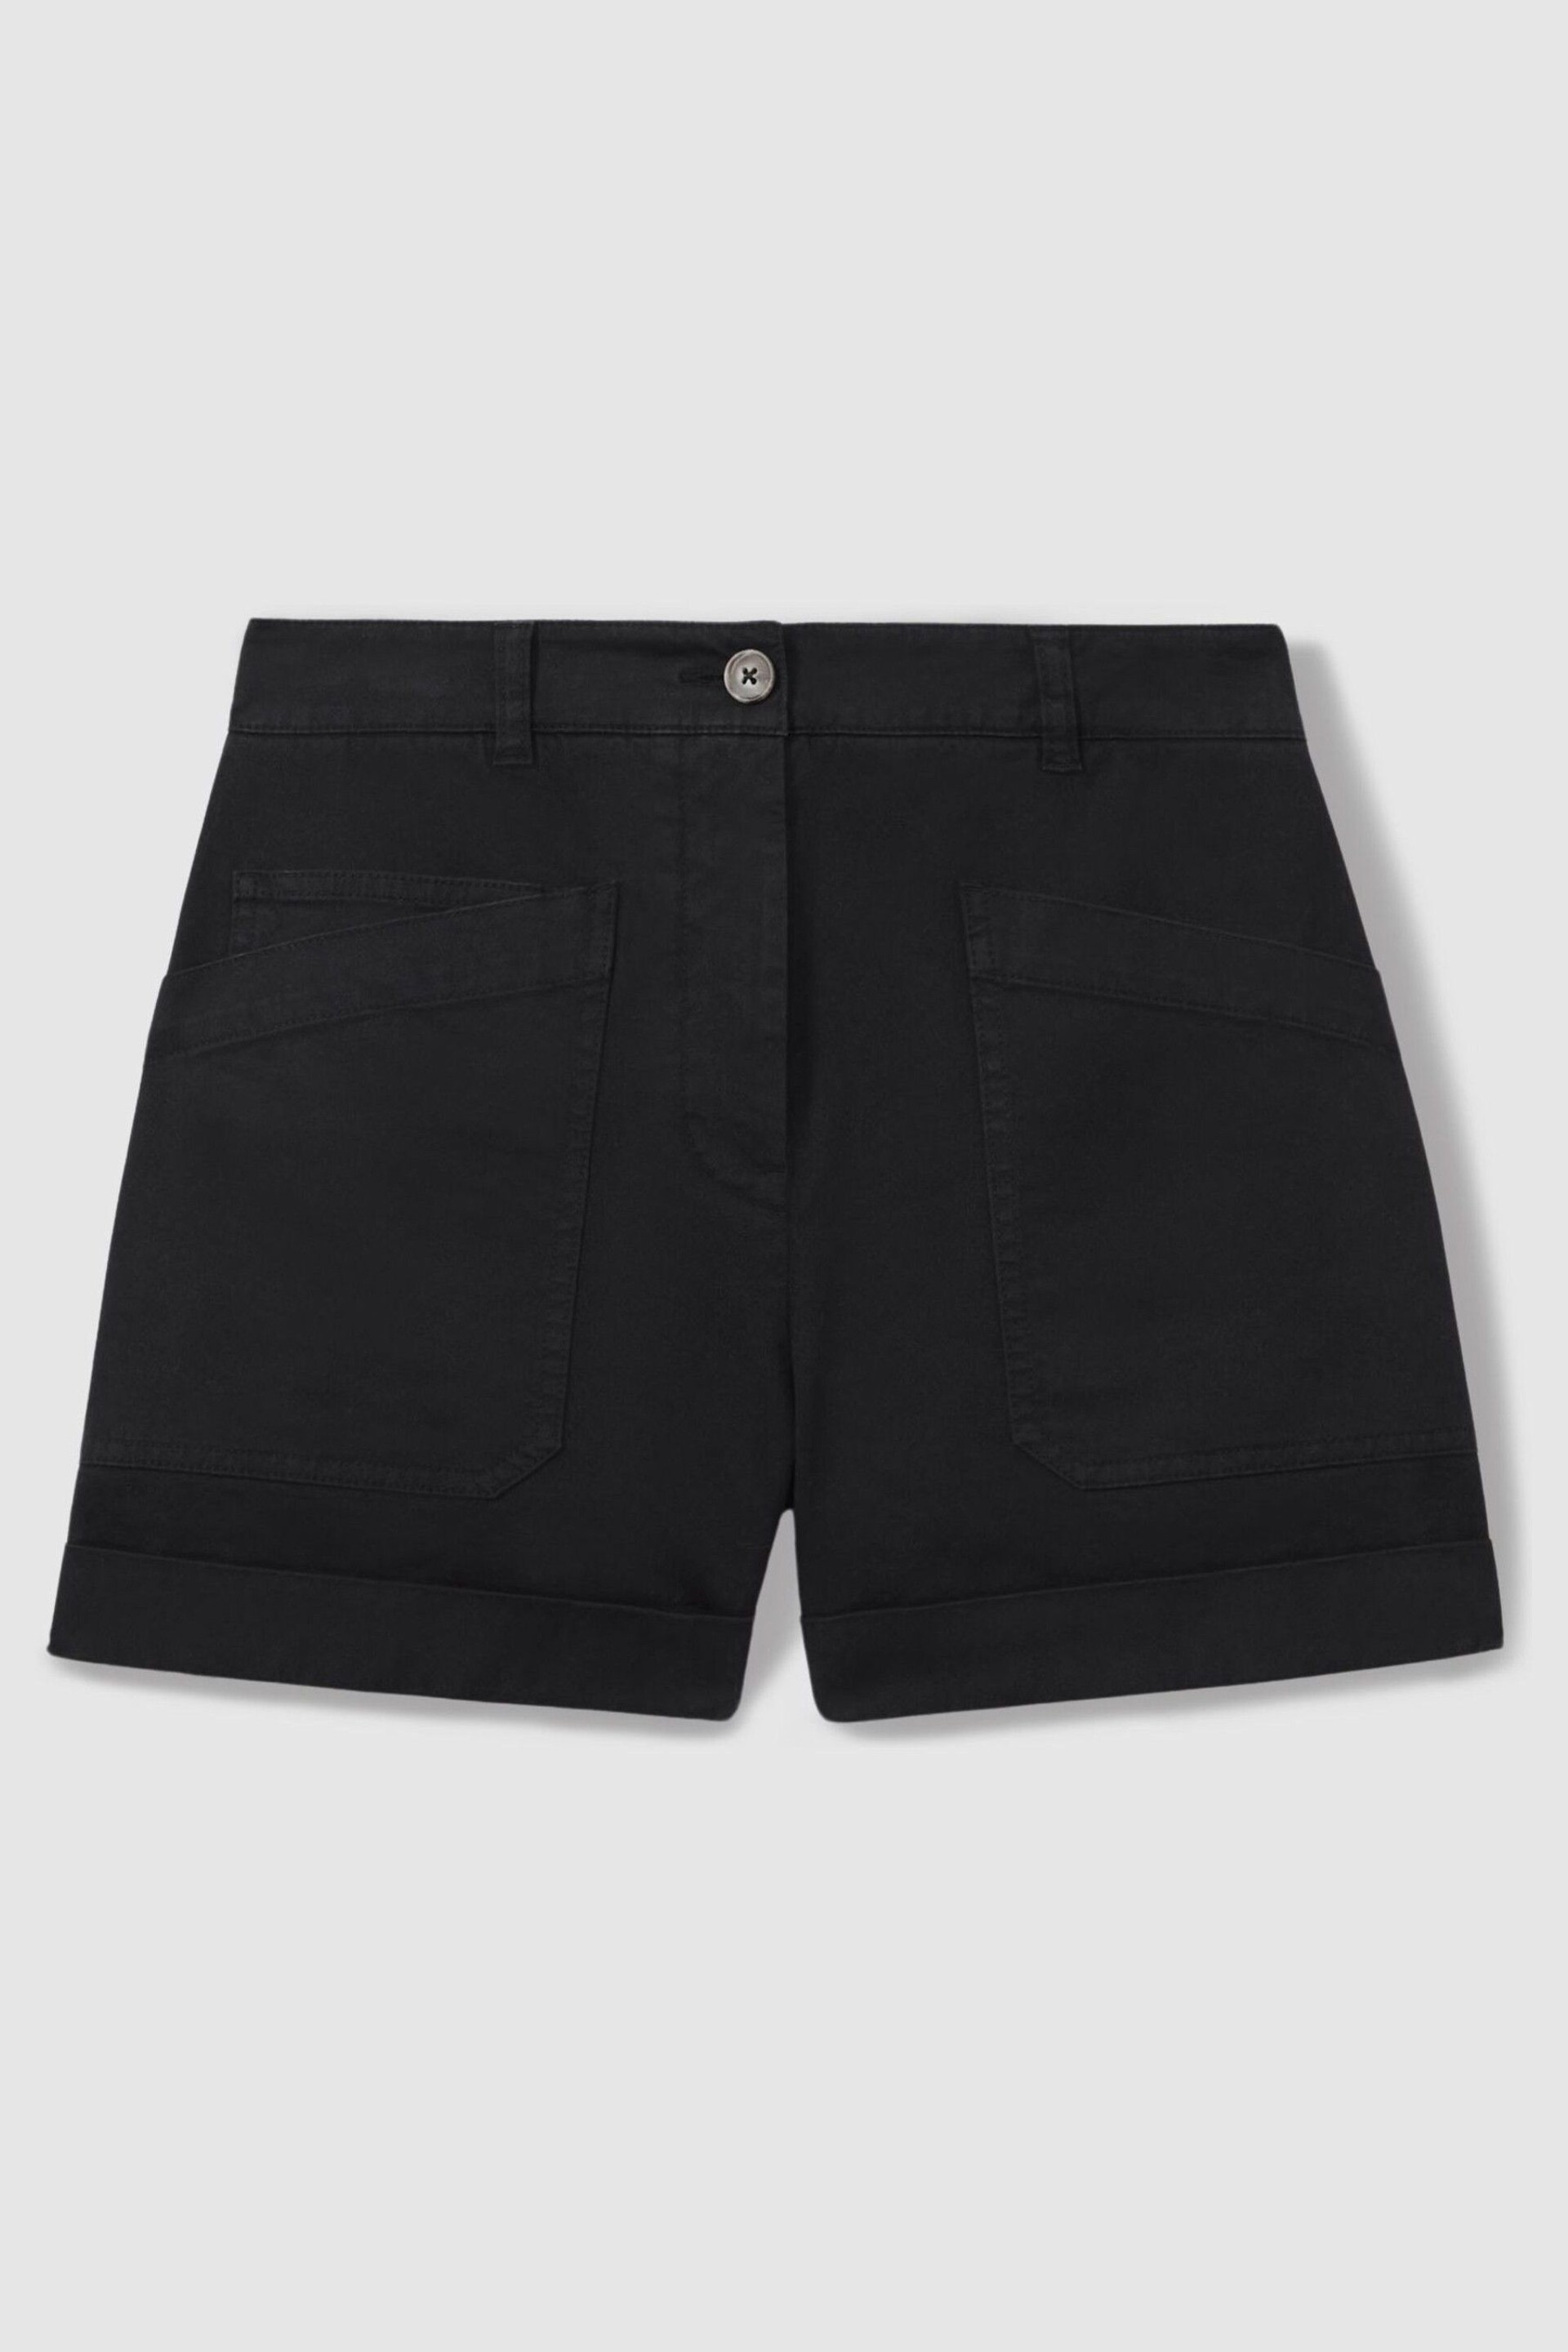 Reiss Navy Nova Cotton Blend Shorts with Turned-Up Hems - Image 2 of 5